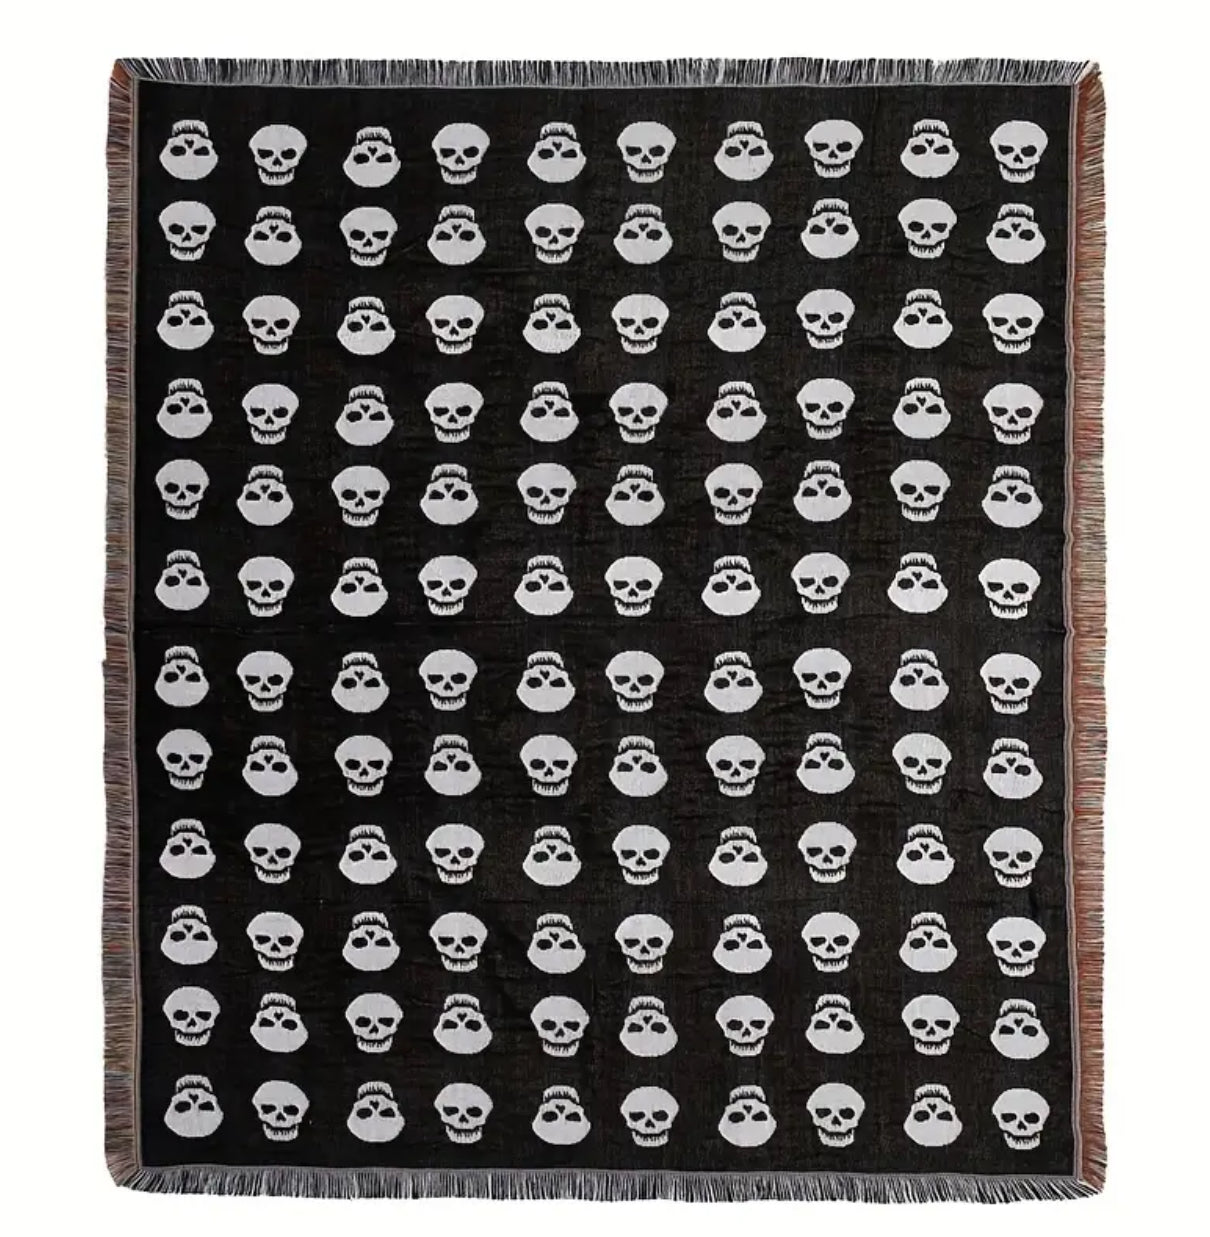 Woven Double-Sided Skull Tassel Blanket — 47 x 59 inches